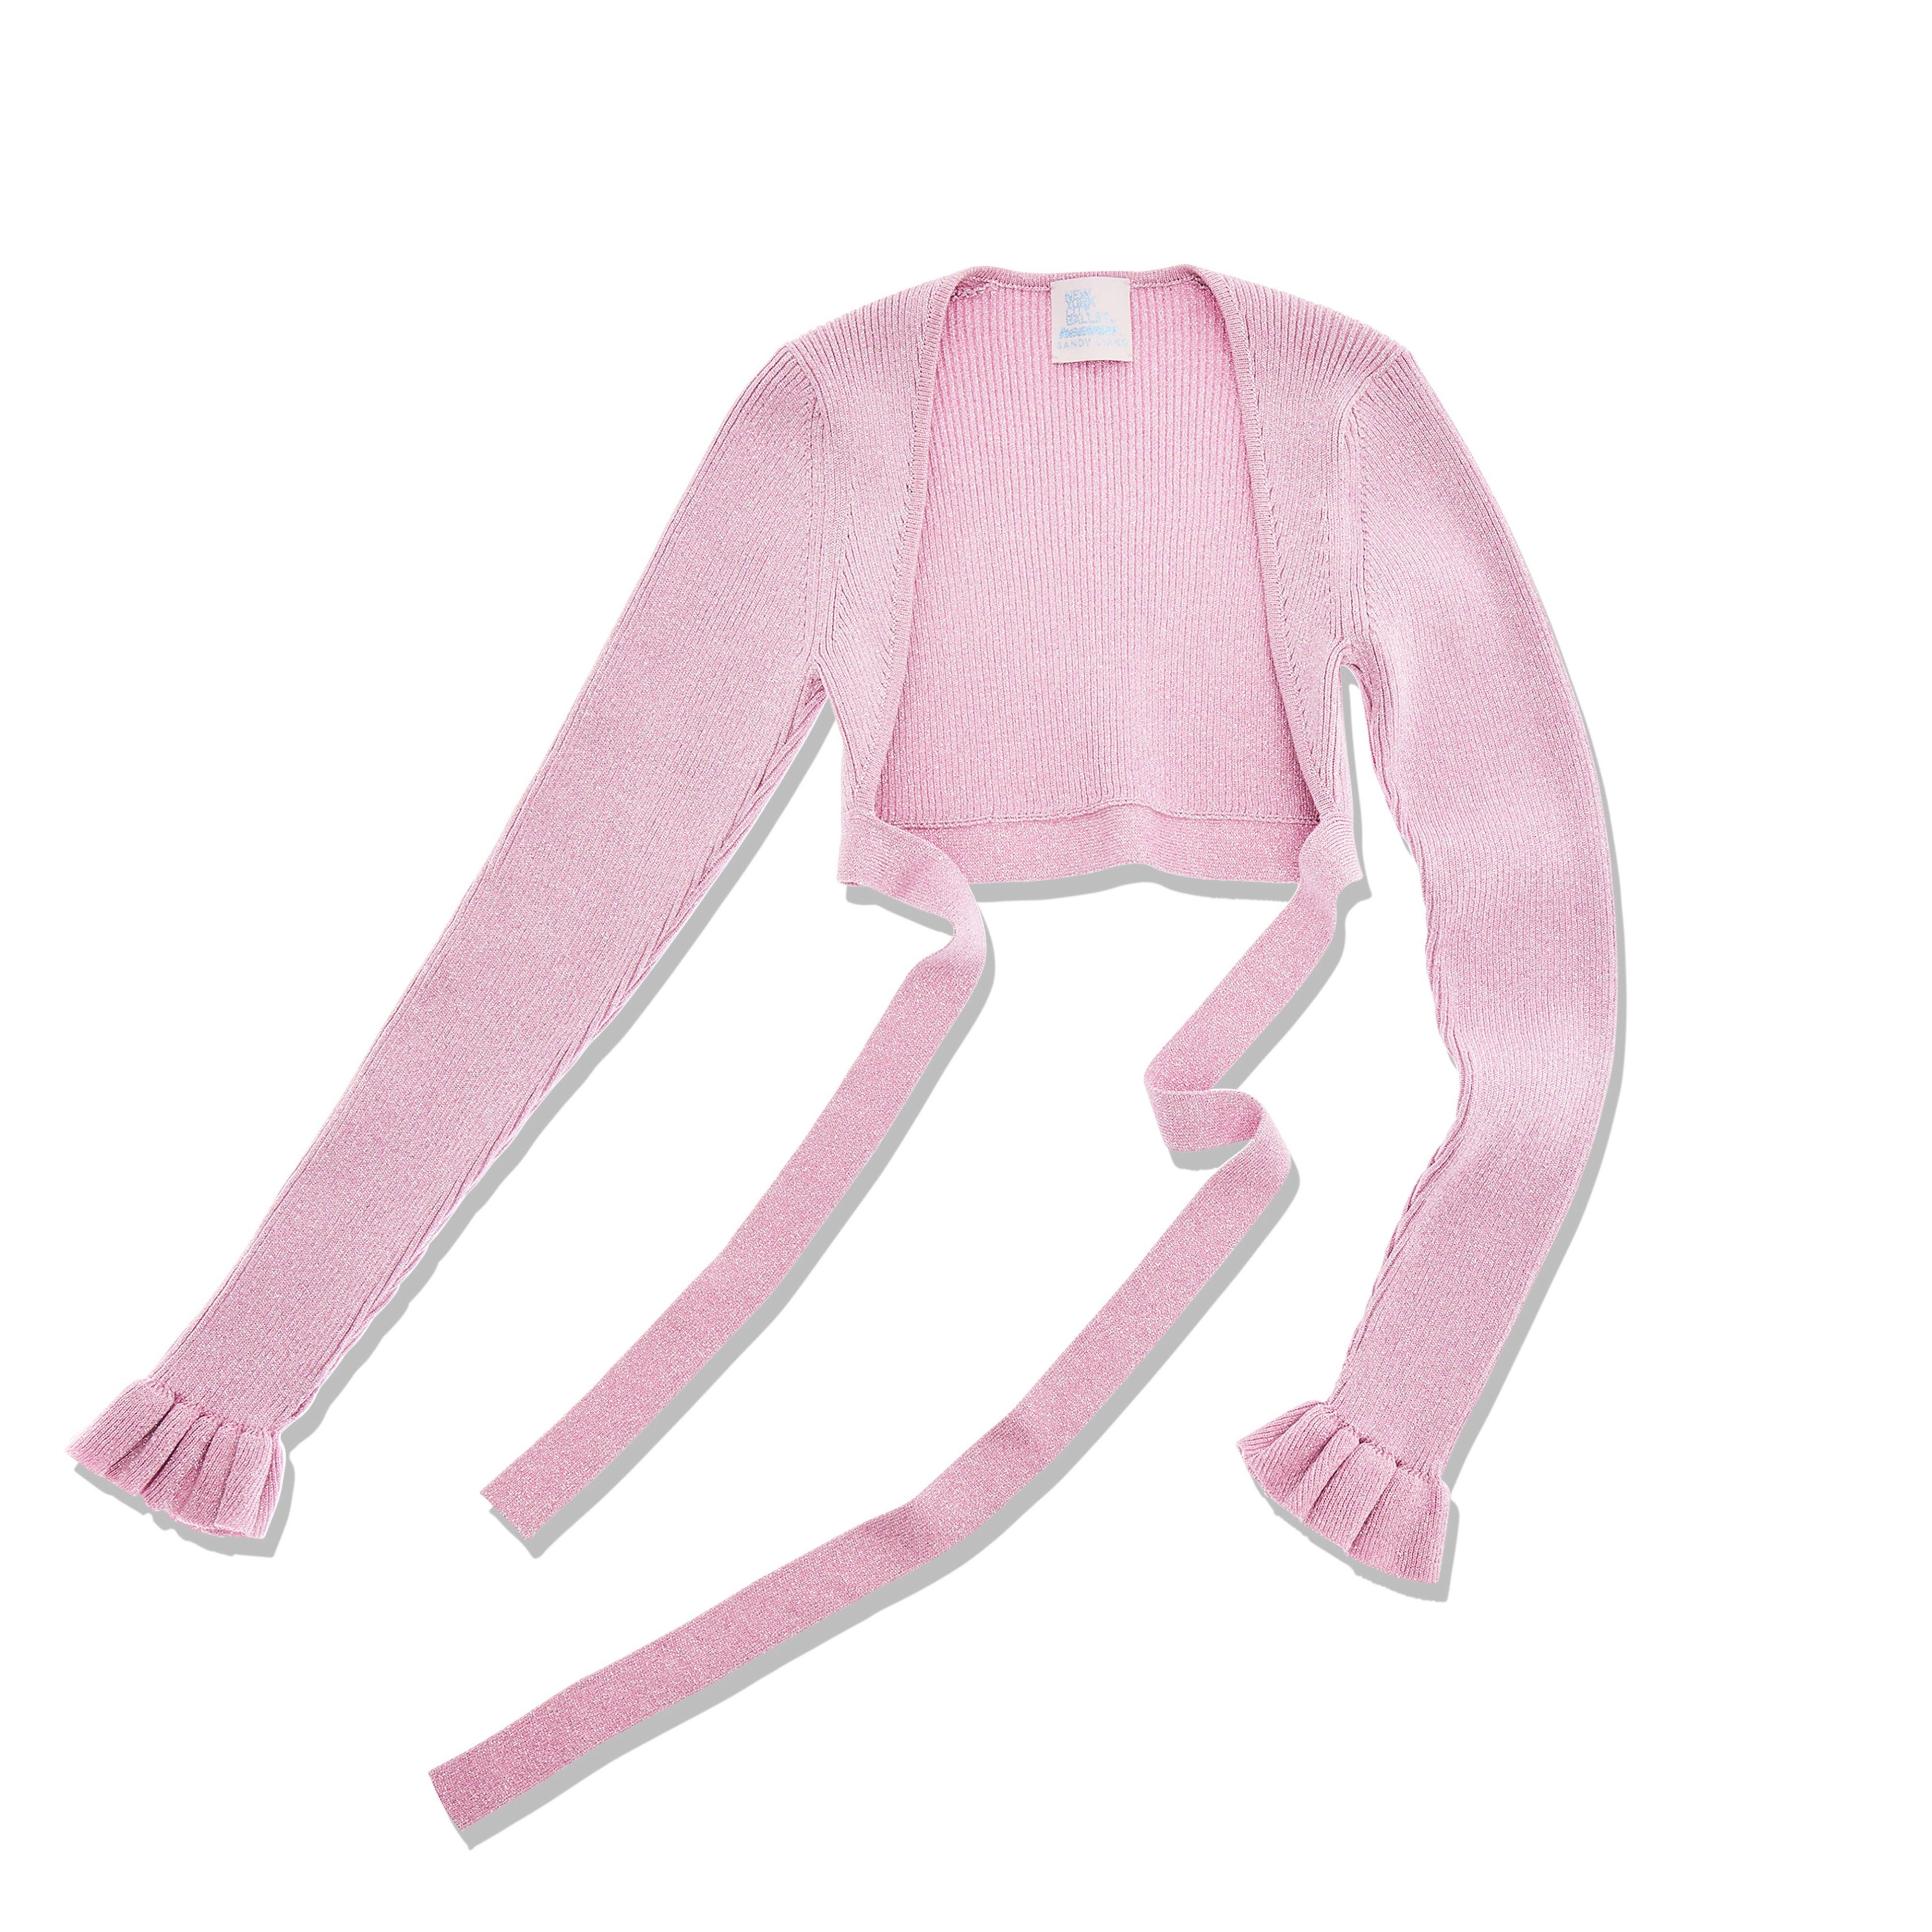 Heaven by Marc Jacobs - Sandy Liang Women's Sparkly Bolero Tie - (Pink) by HEAVEN BY MARC JACOBS